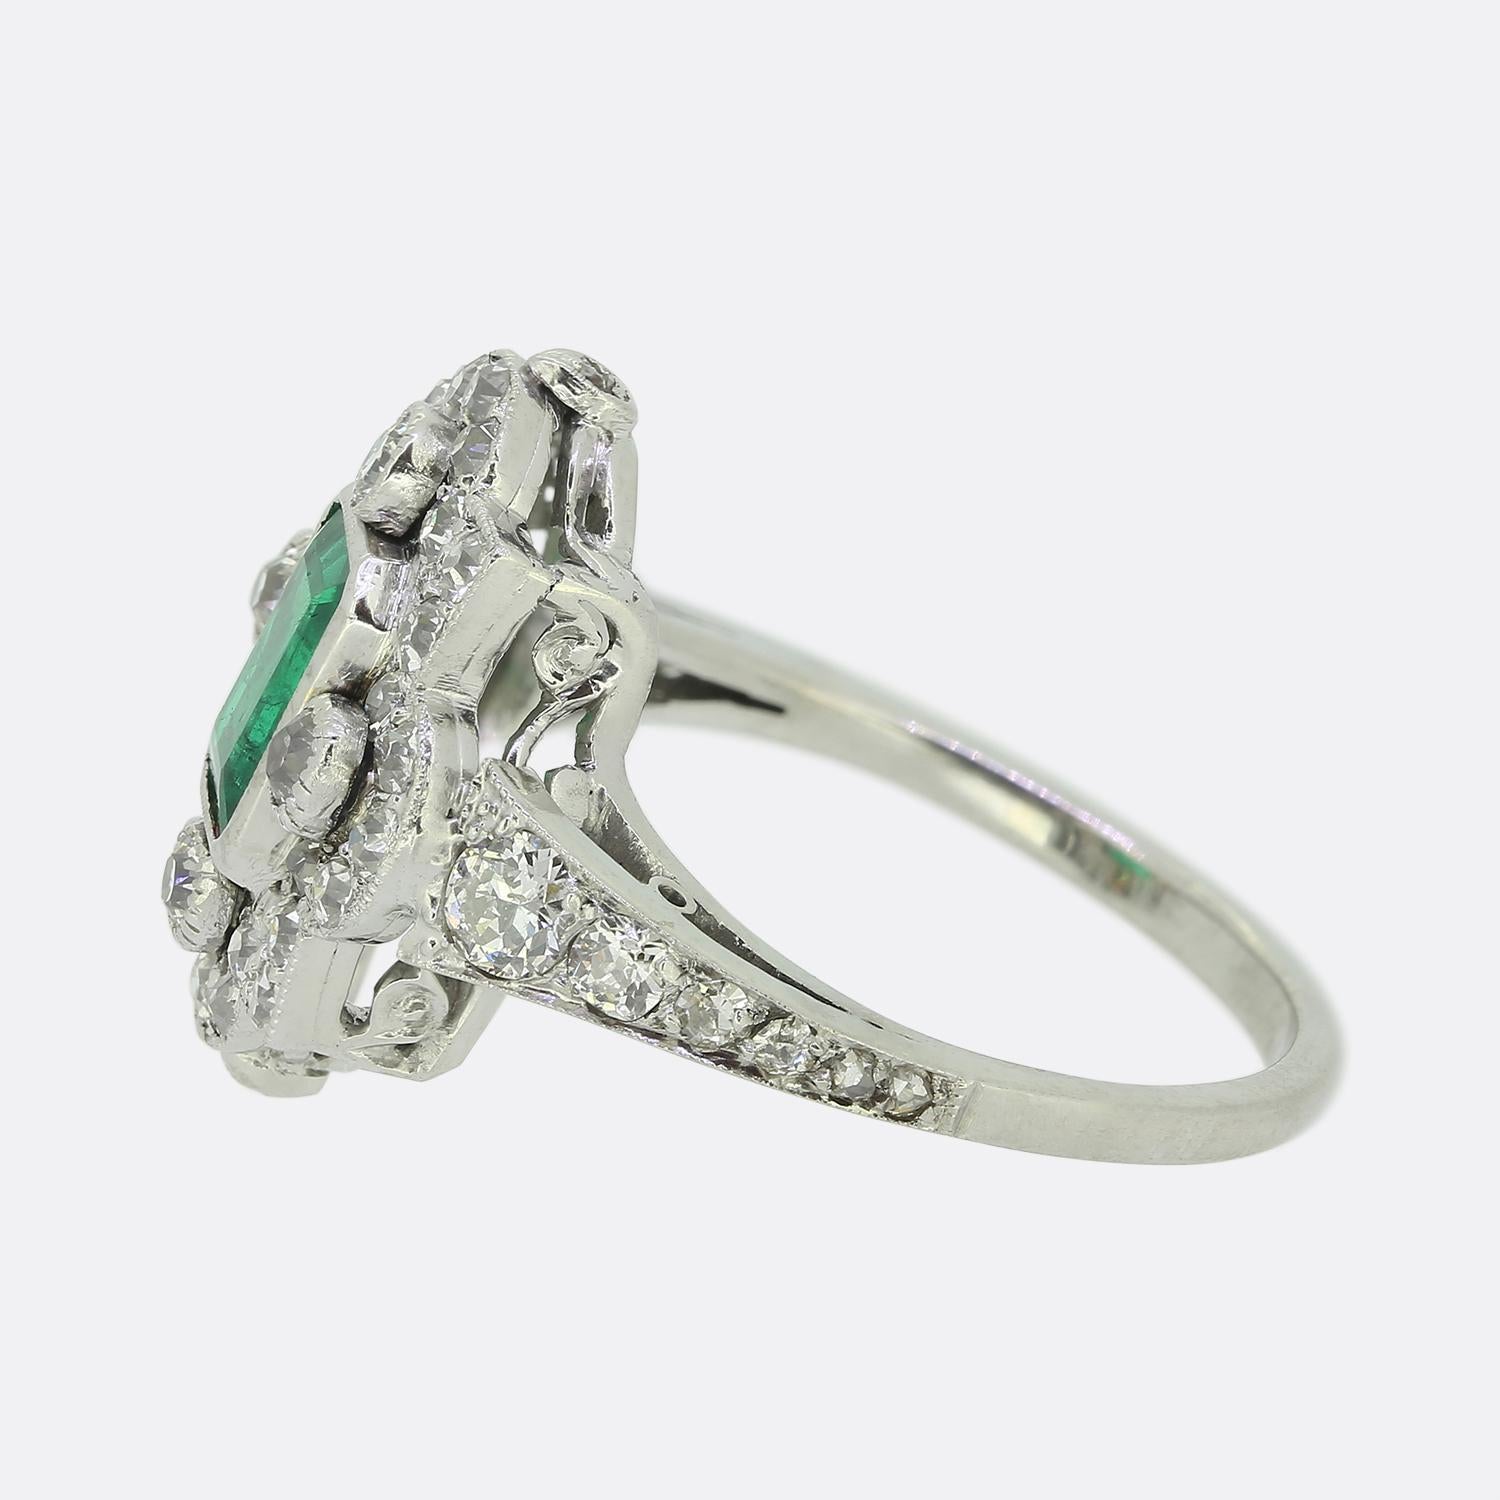 Here we have a marvellous emerald and diamond cluster ring crafted during the pinnacle of the Art Deco movement. This platinum piece features a single emerald cut emerald which sits slightly risen at the centre of the face. This principal stone is